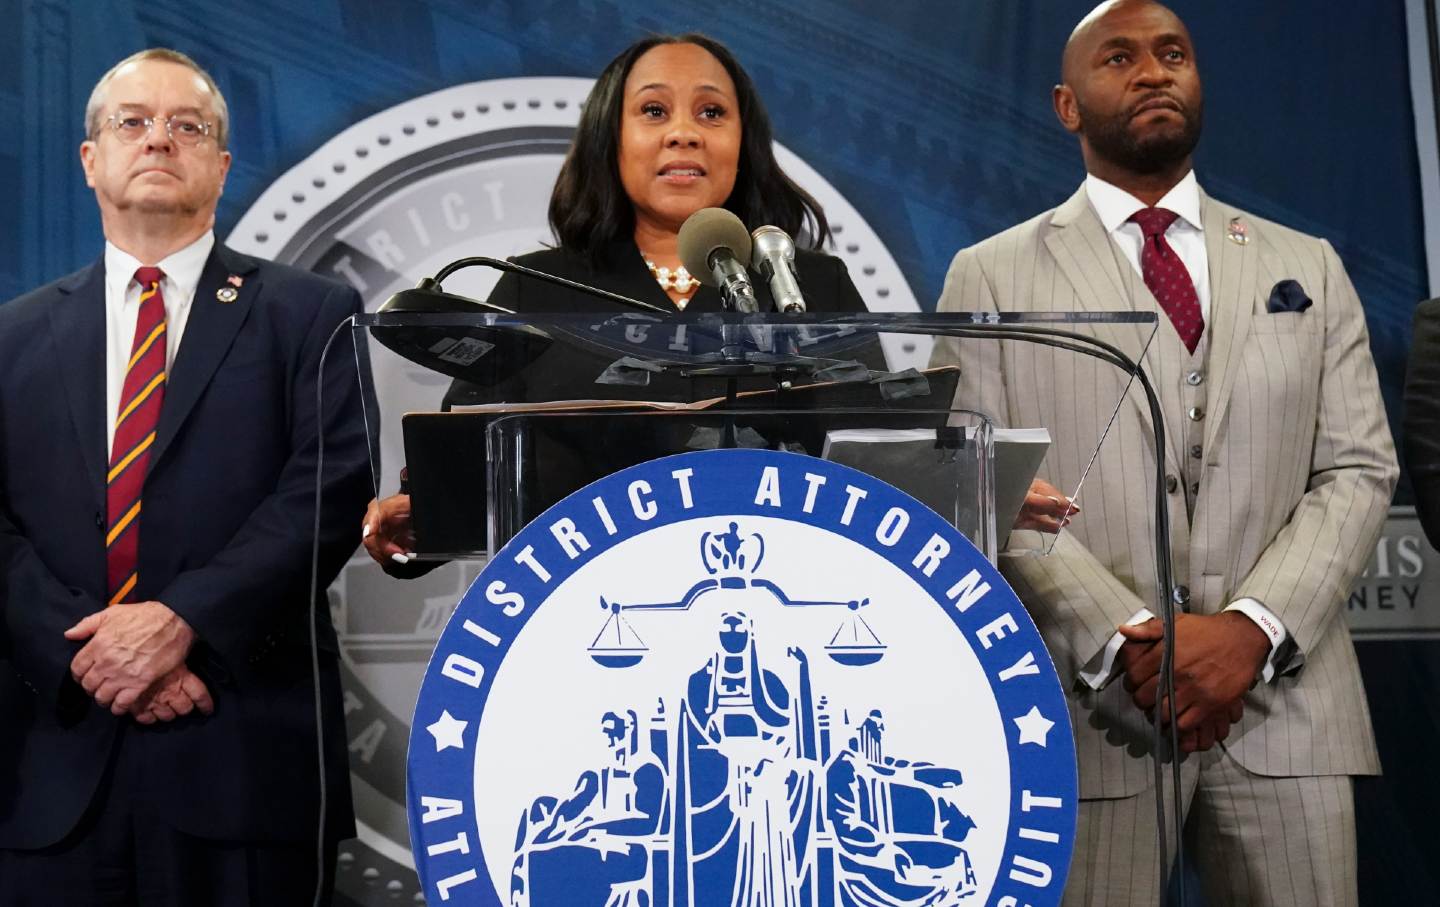 Fulton County District Attorney Fani Willis, center, speaks at a news conference alongside prosecutor Nathan Wade, right.